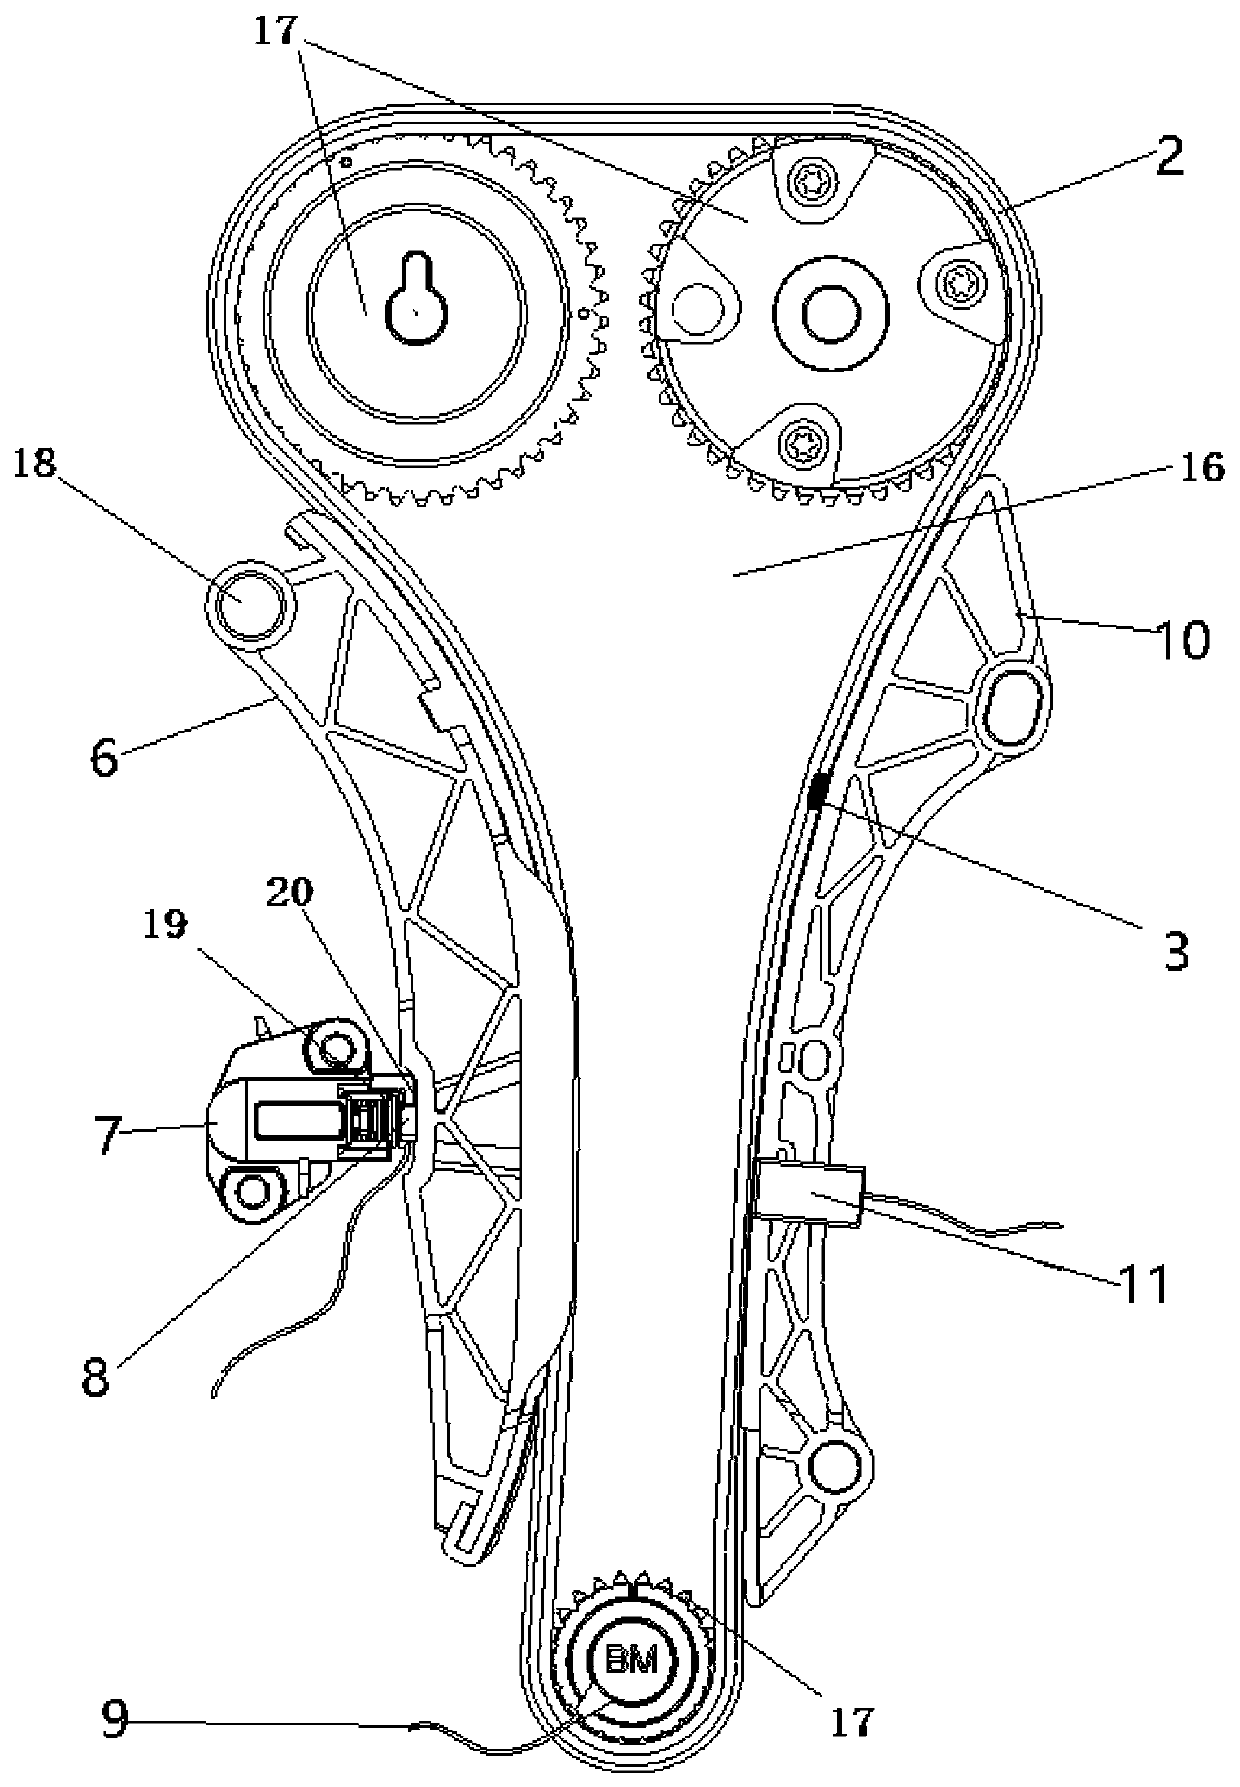 Engine timing chain tension testing device and method